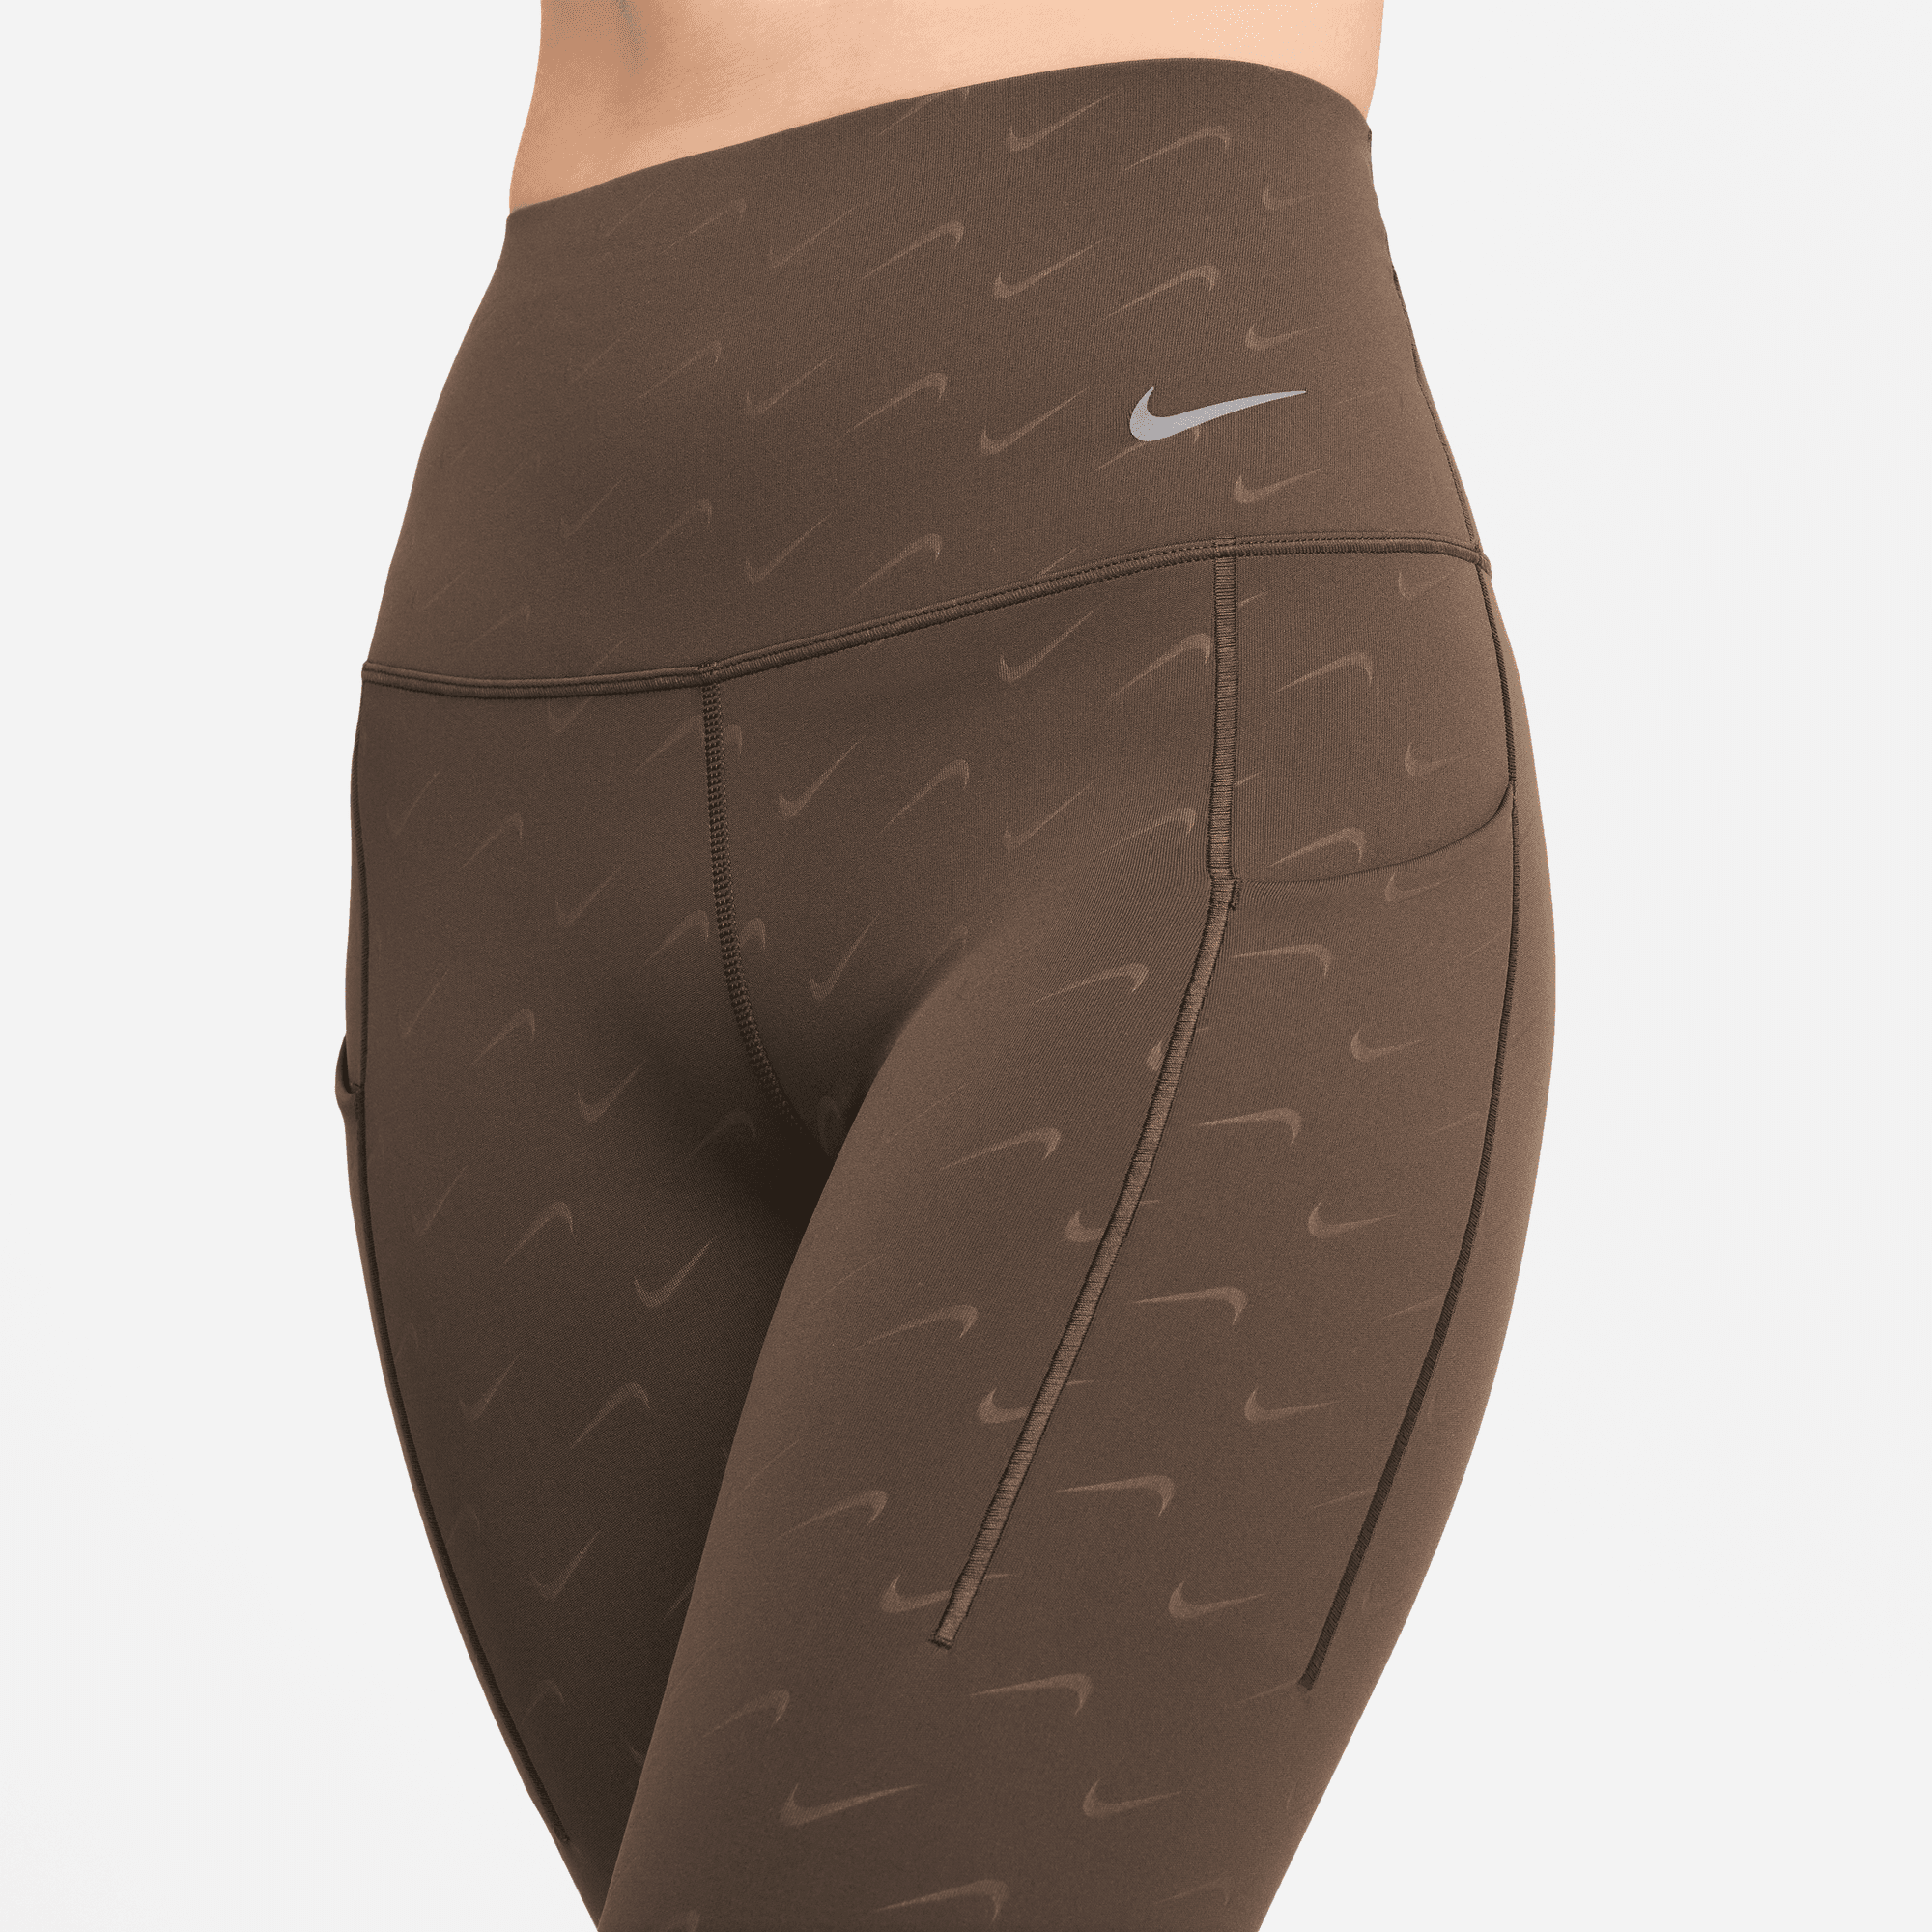 NIKE UNIVERSA WOMEN'S MEDIUM-SUPPORT HIGH-WAISTED 7/8 PRINTED LEGGINGS WITH POCKETS